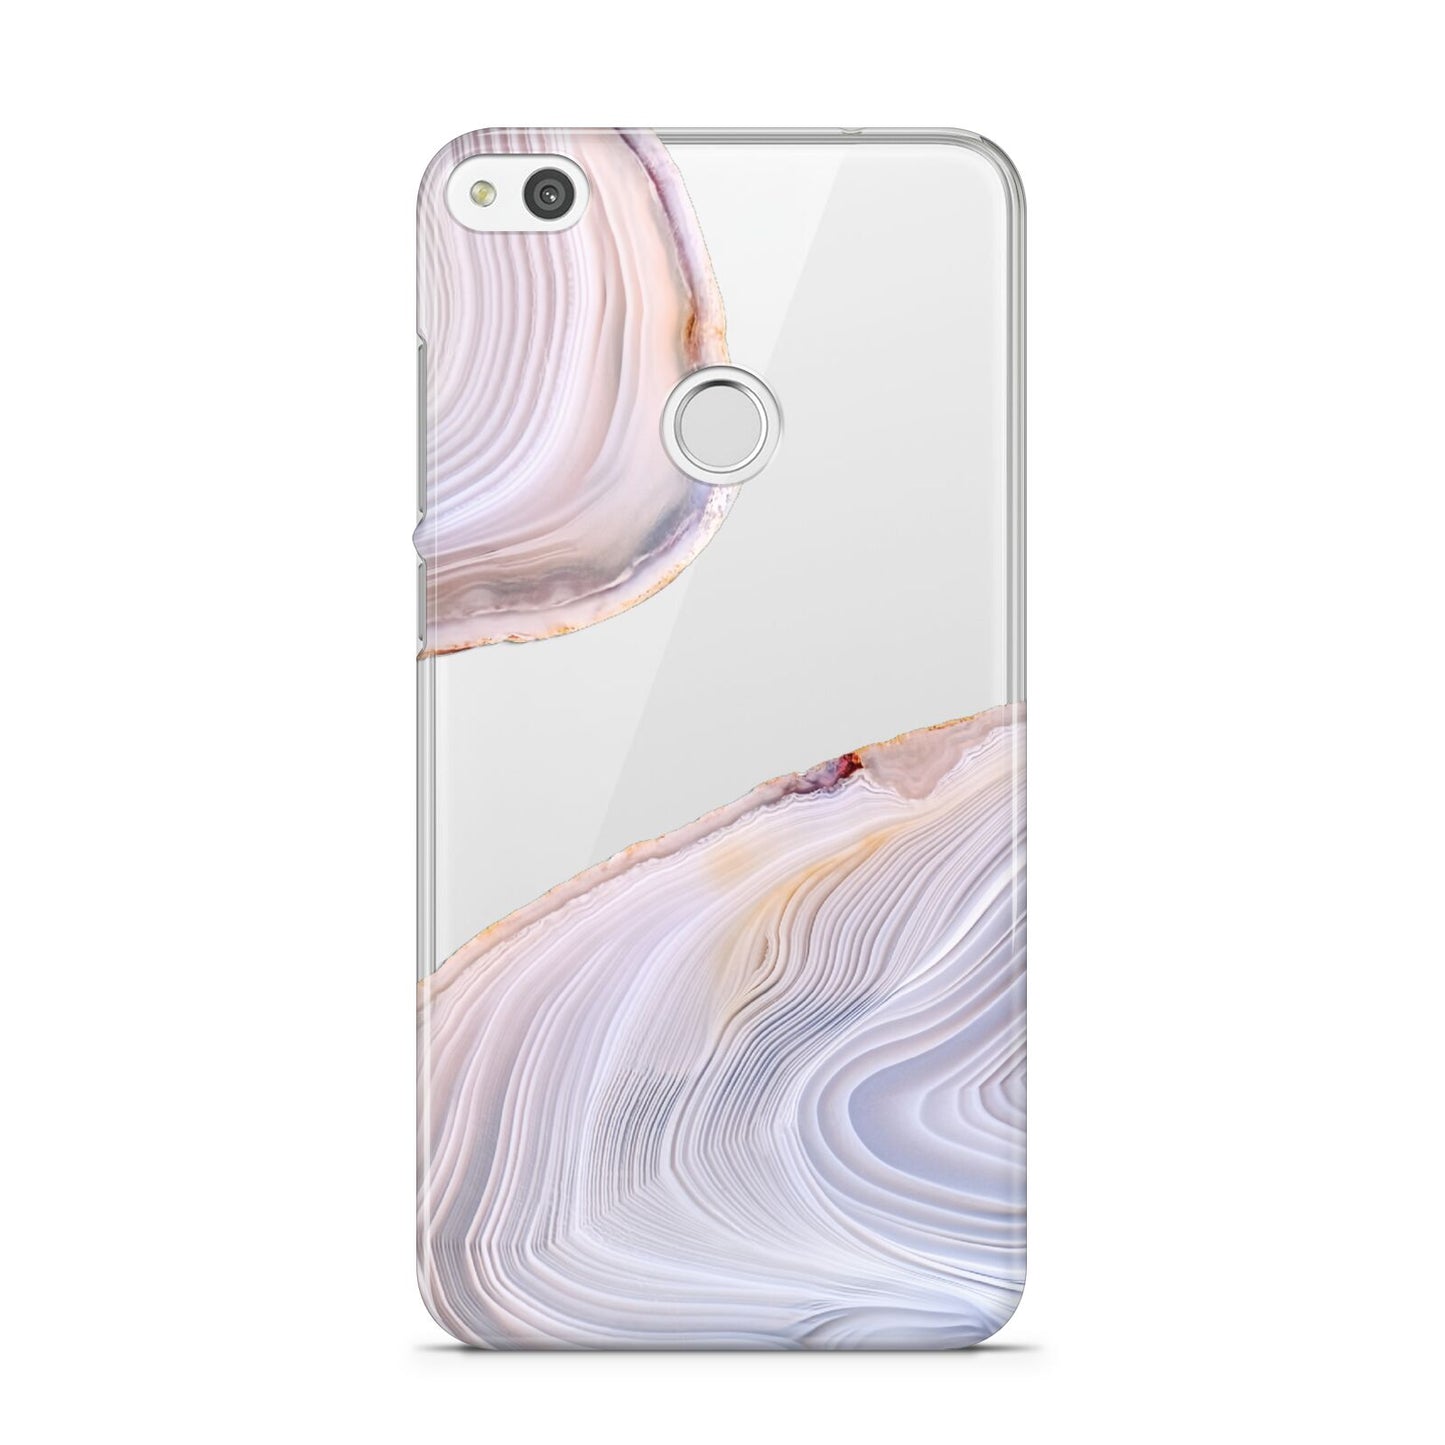 Agate Pale Pink and Blue Huawei P8 Lite Case